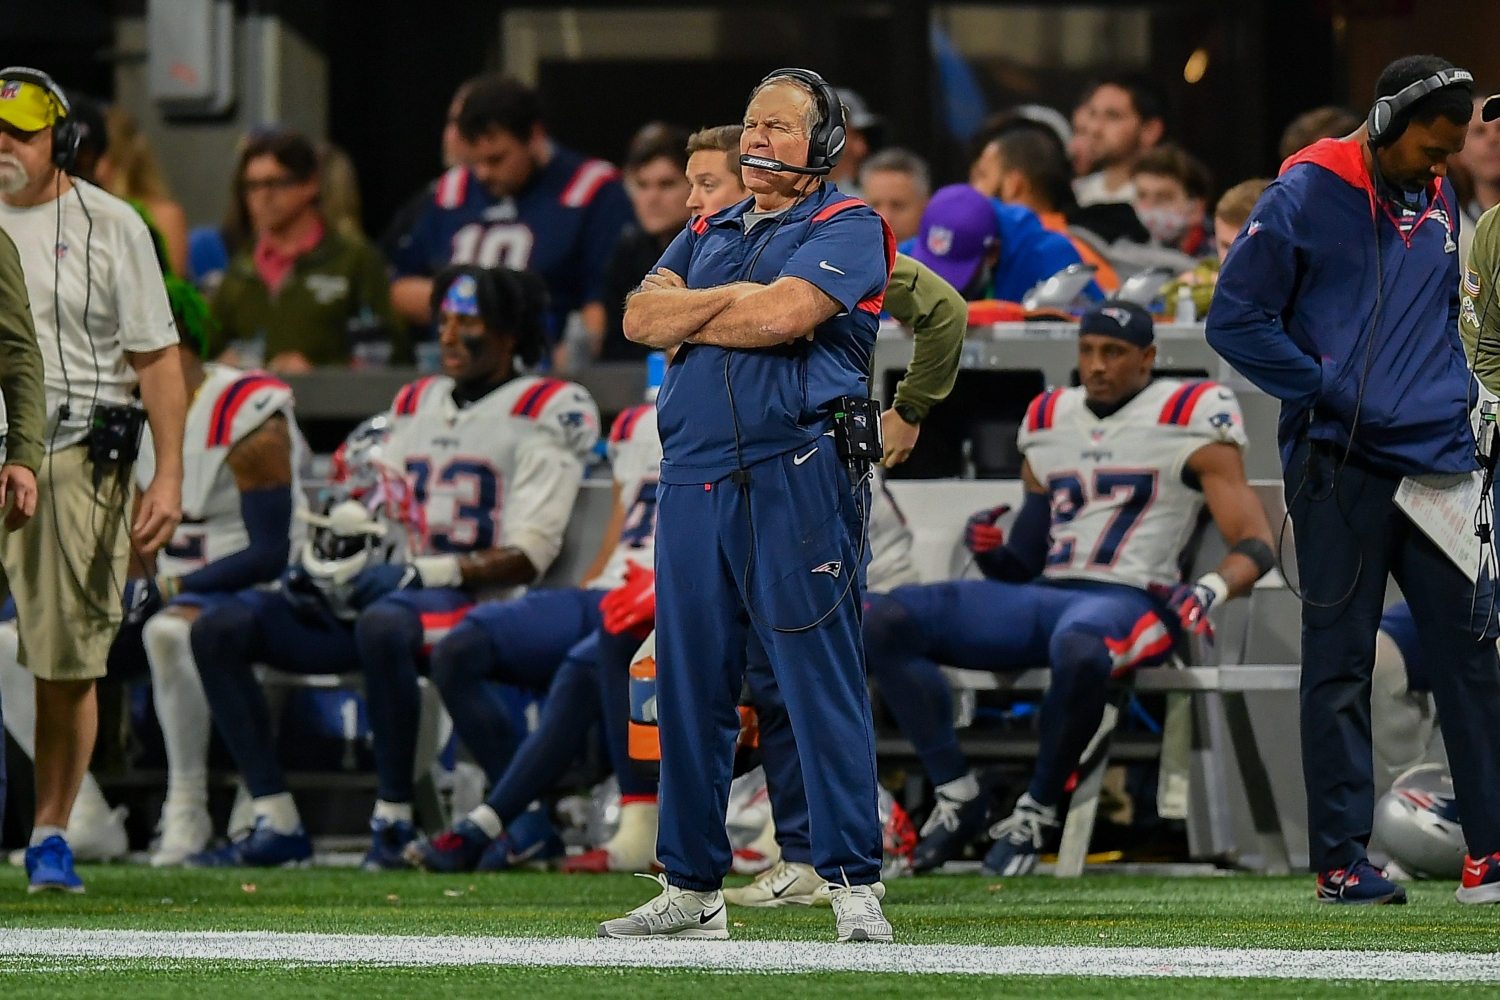 Bill Belichick watches his team play during a game between the New England Patriots and the Atlanta Falcons.